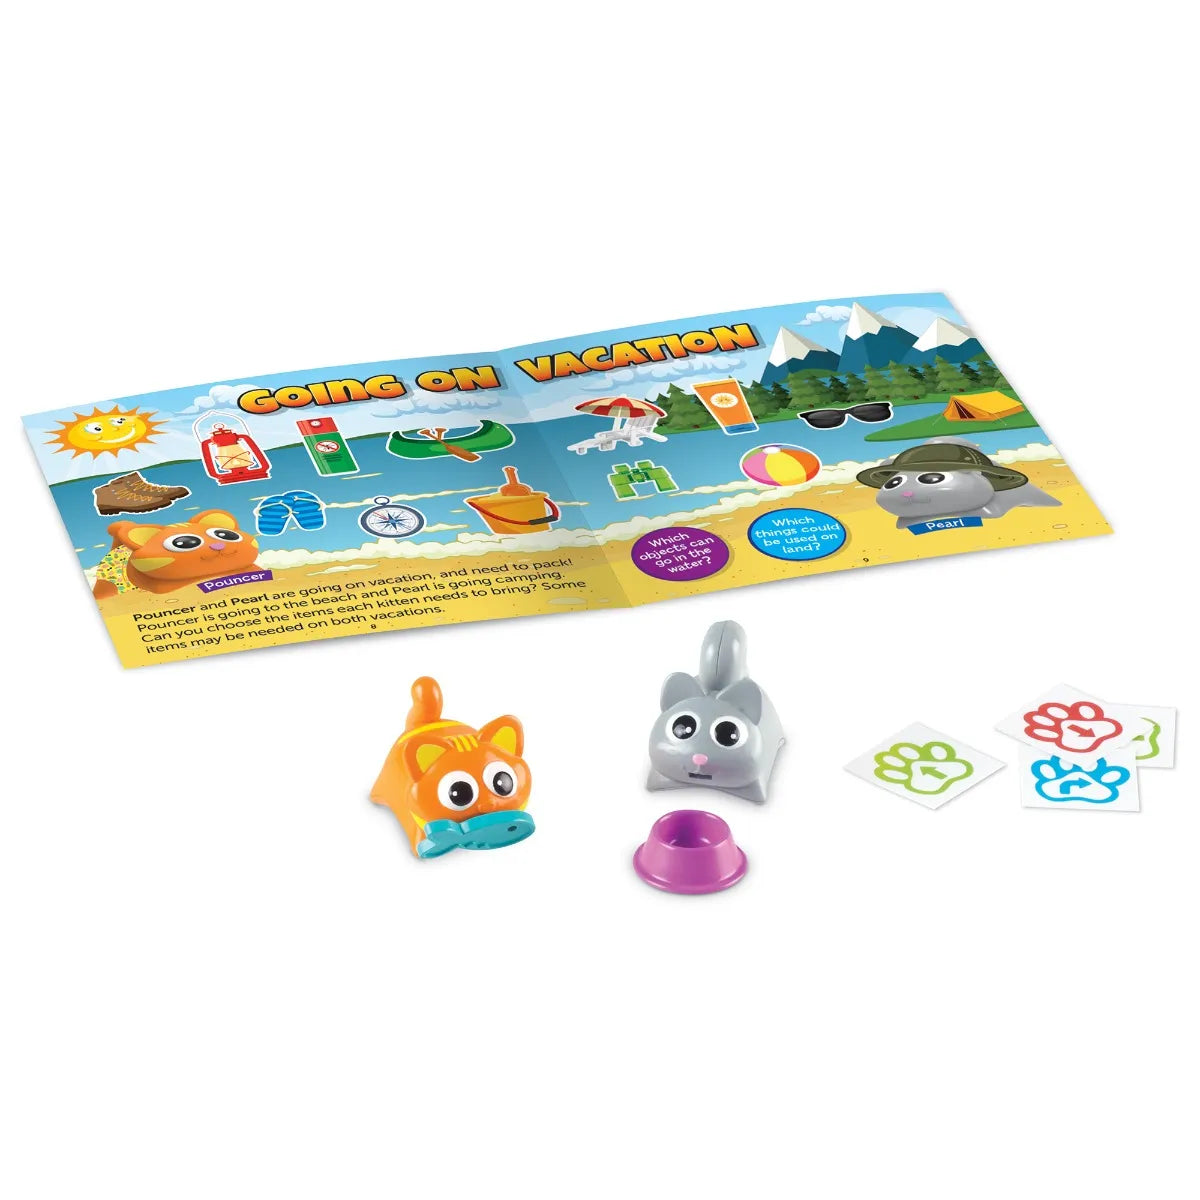 Coding Critters® Pair-a-Pets: Adventures with Pouncer & Pearl - MoonyBoon